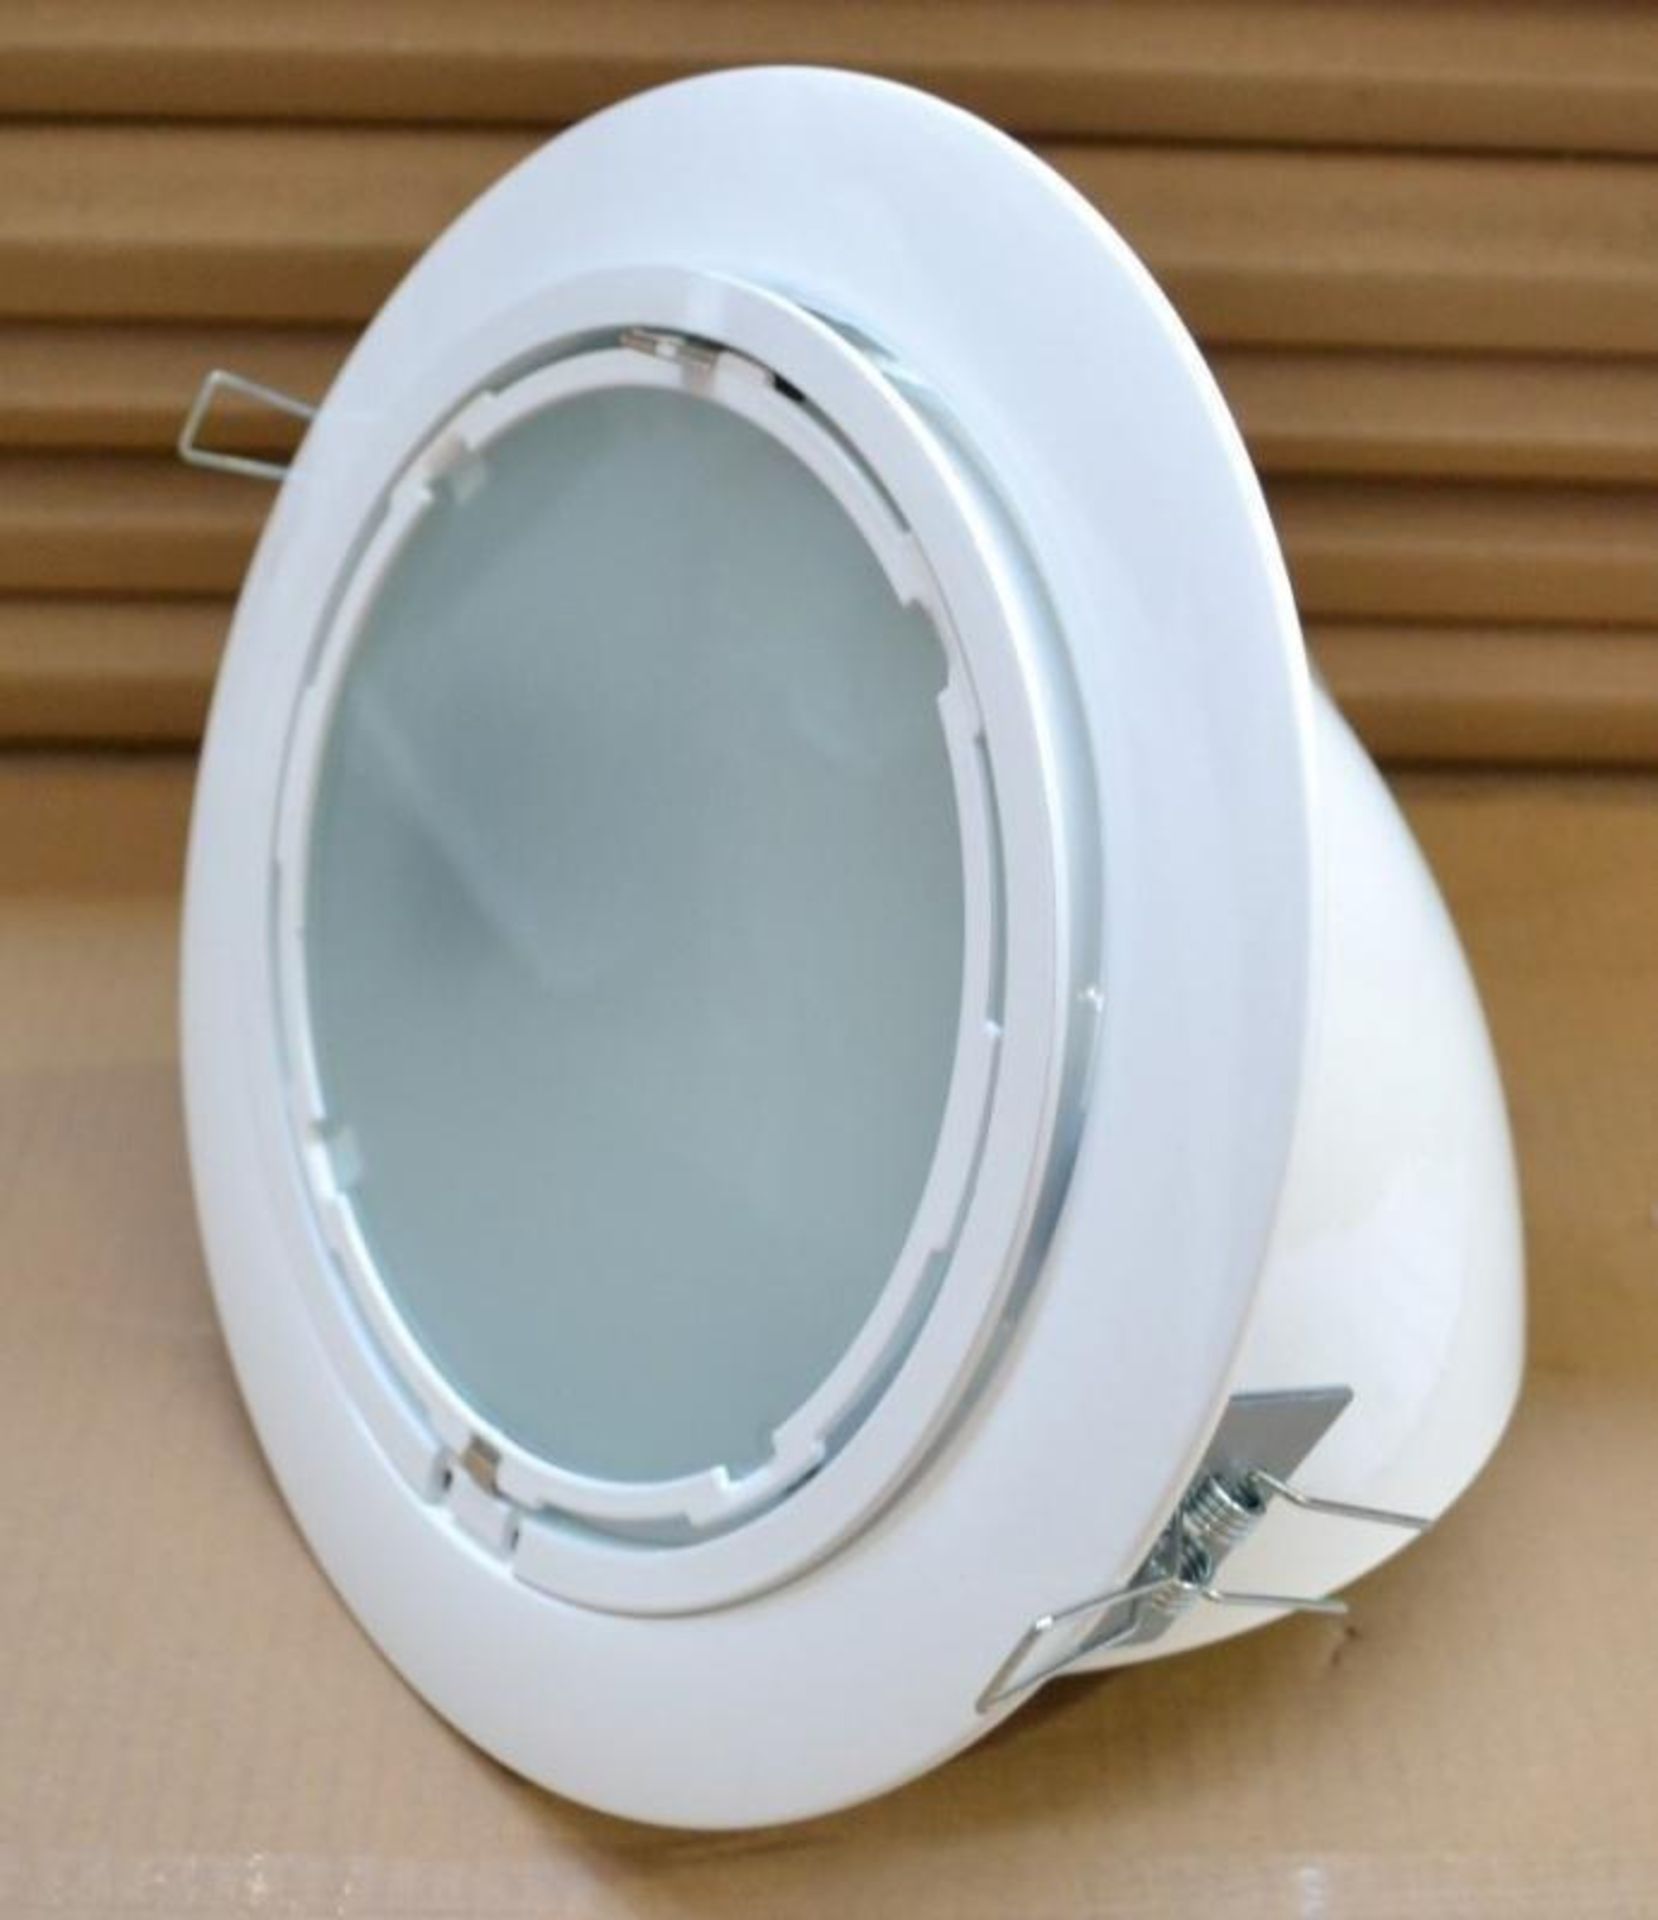 10 x JCC Lighting JC16006 Calida Large Wallwash Downlights With Frosted Lens - Colour: White - New/U - Image 3 of 7